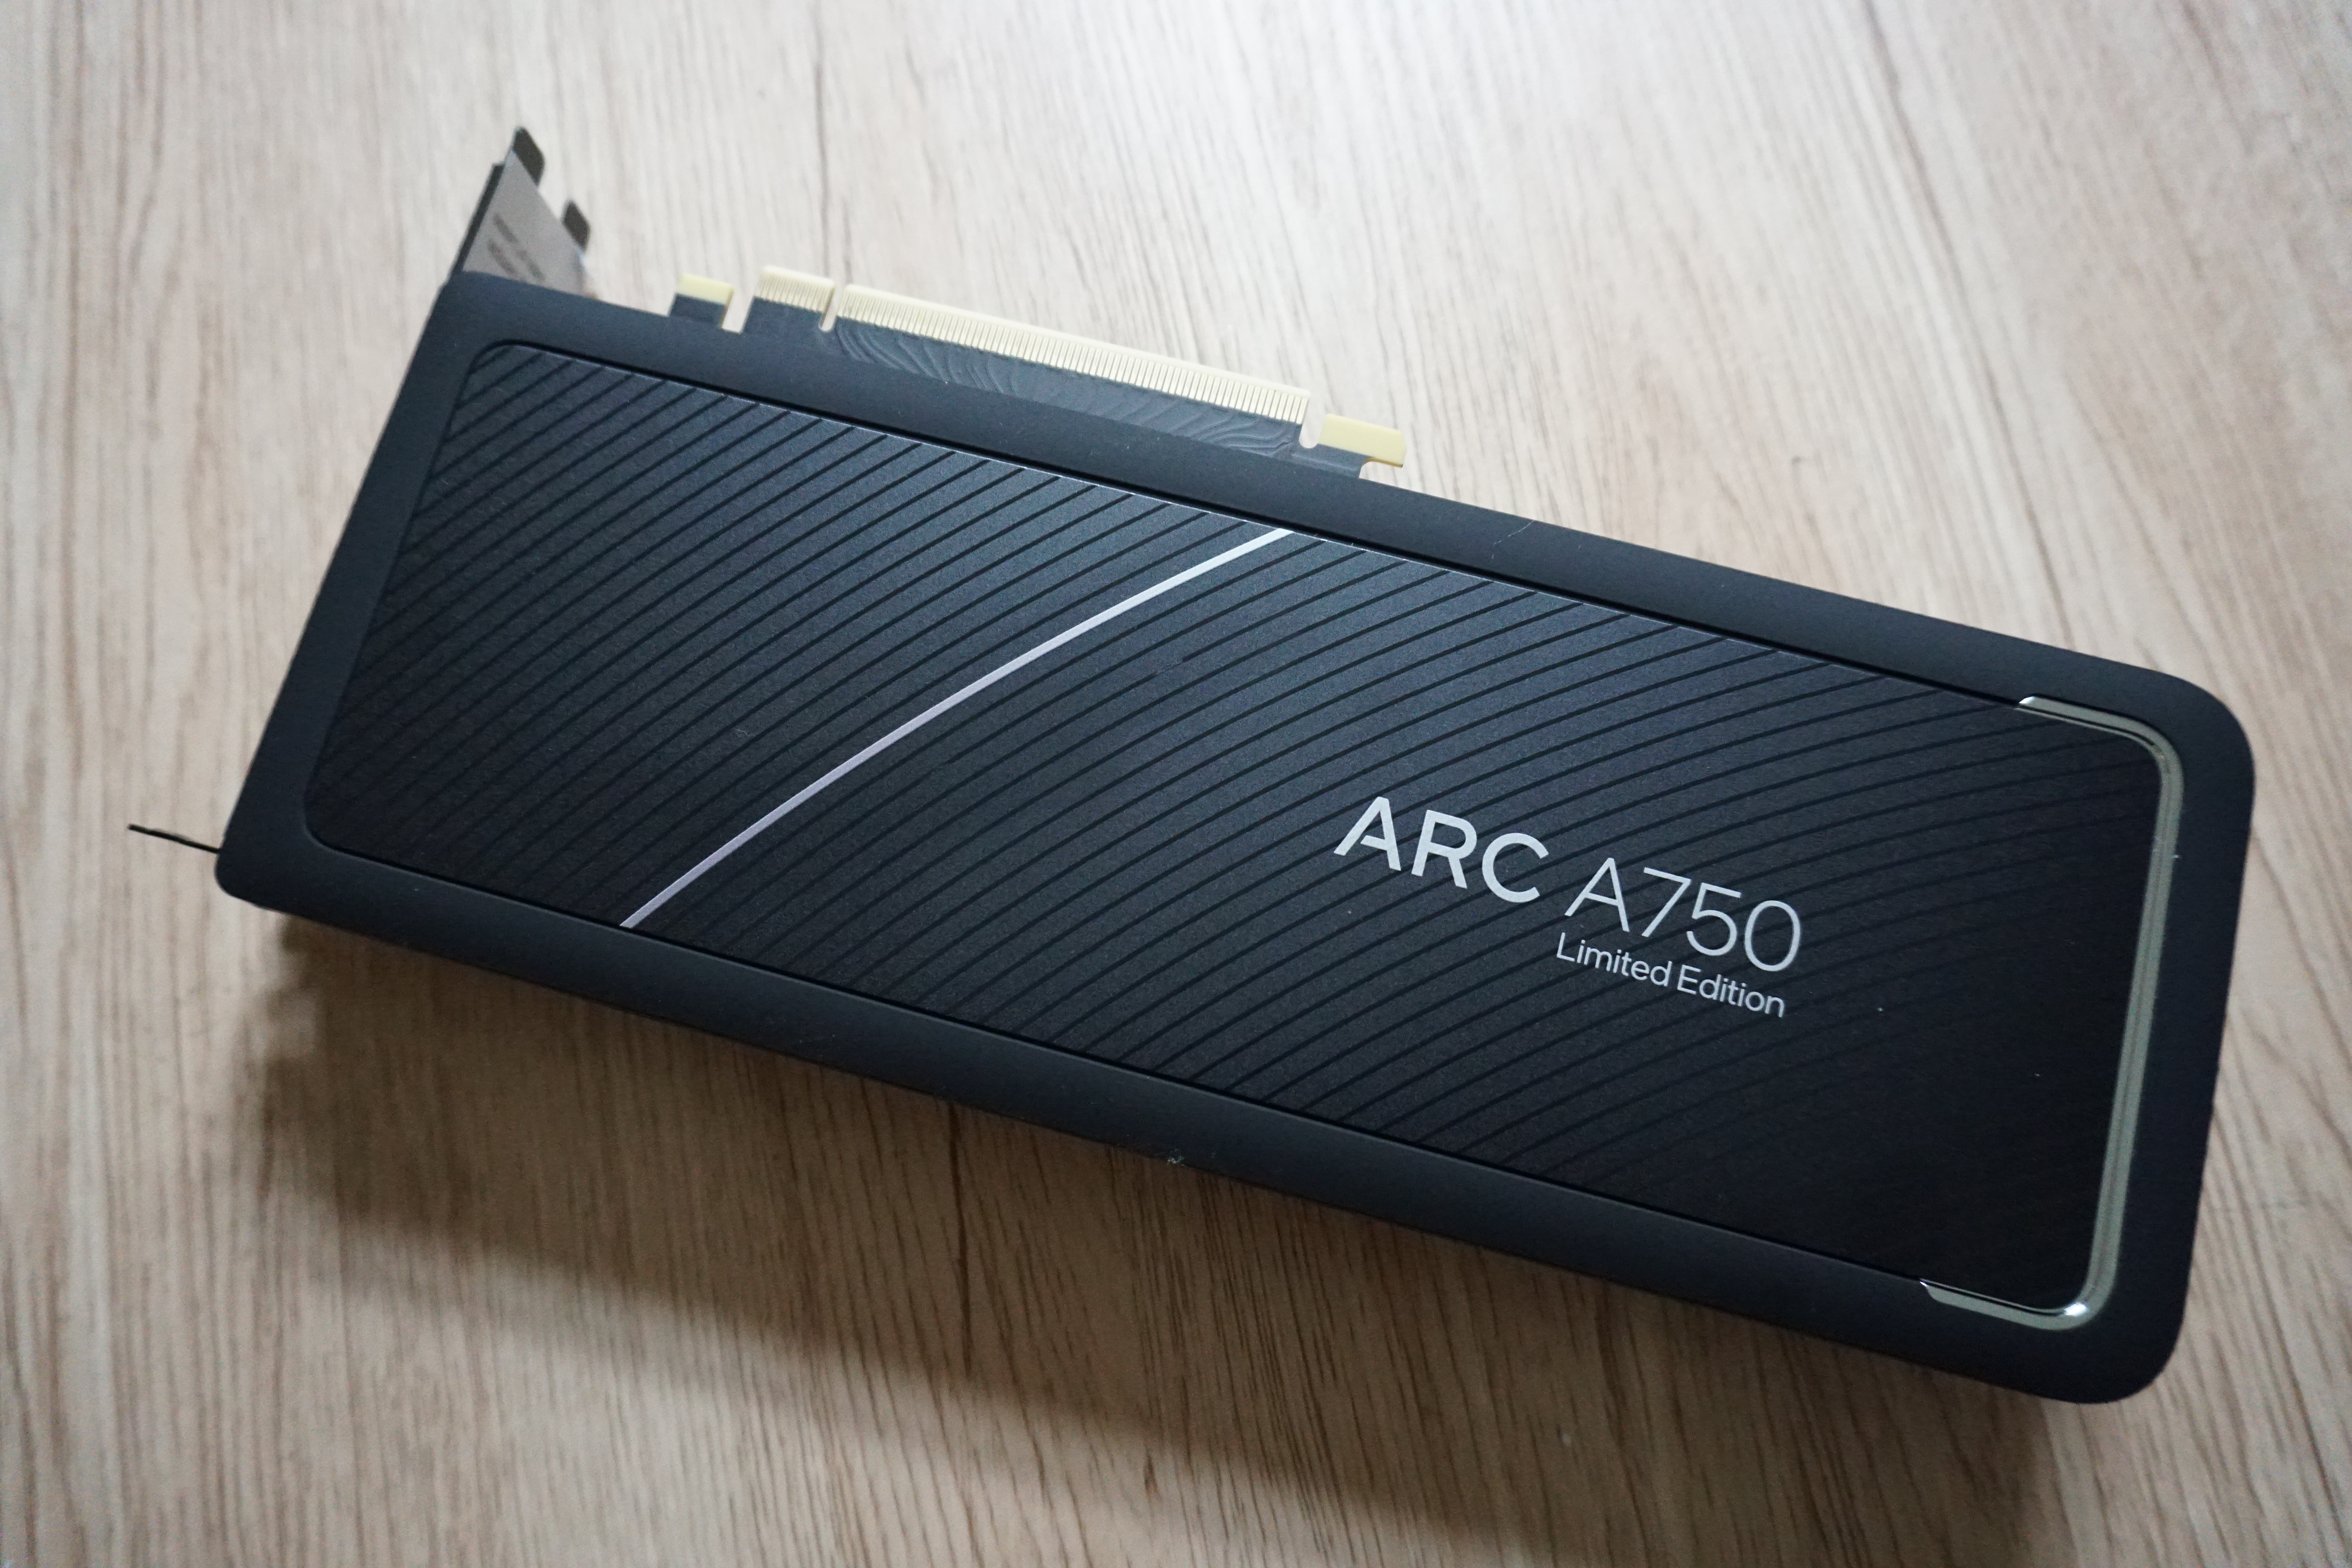 Intel Arc A750 - Best 1080p graphics card for ray tracing